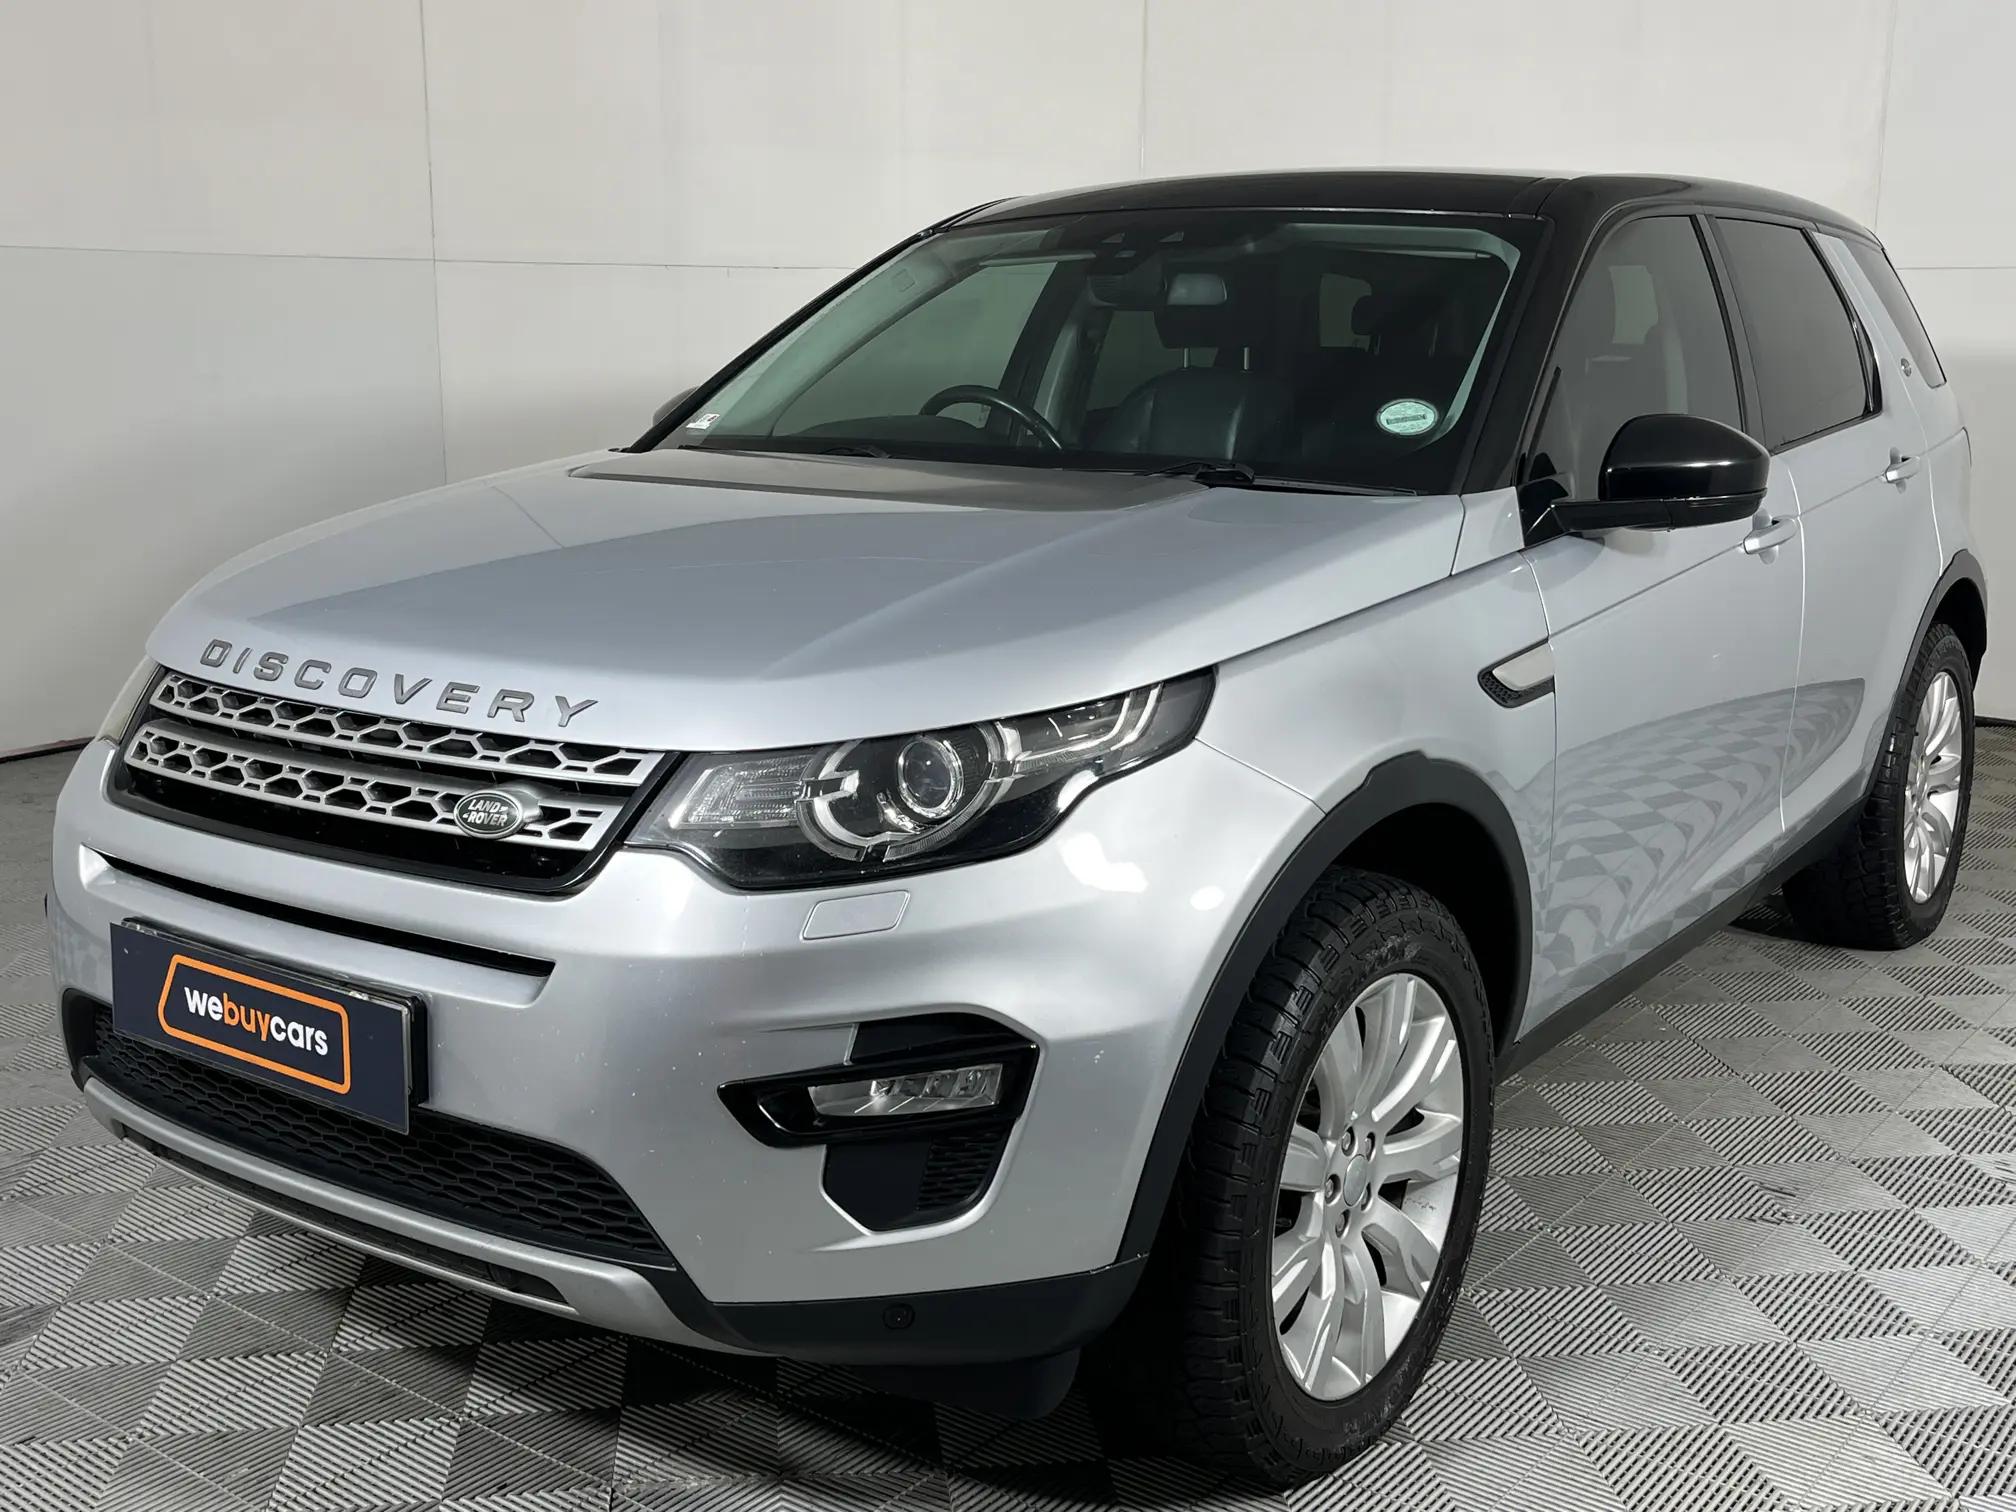 Land Rover Discovery Sport 2.2 (140 kW) TD 4 HSE